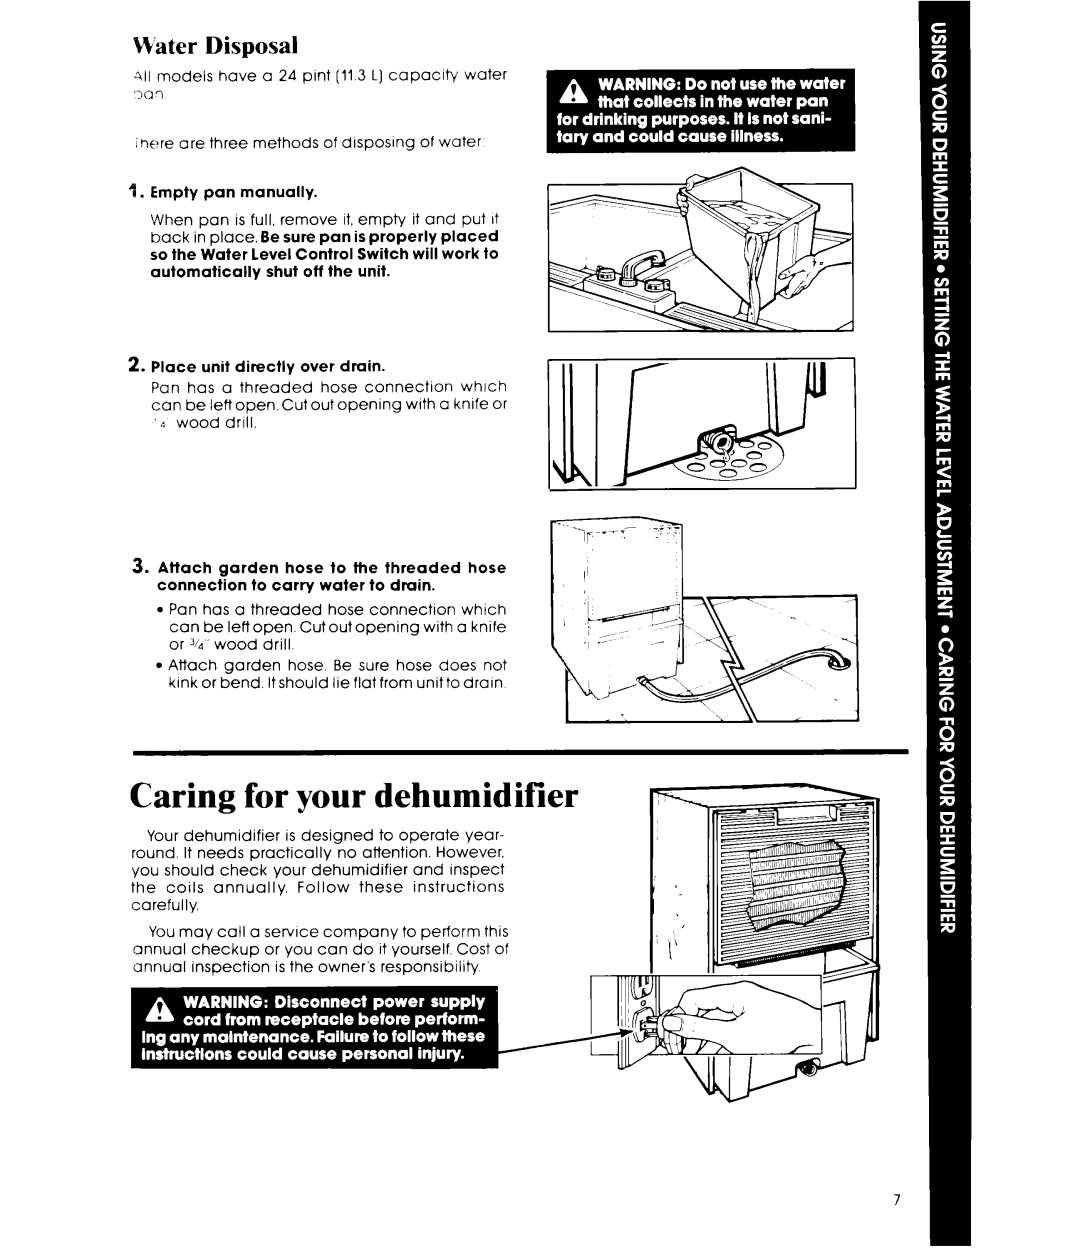 Whirlpool AD0402XS0 manual Caring for your dehumidifier, Water Disposal 